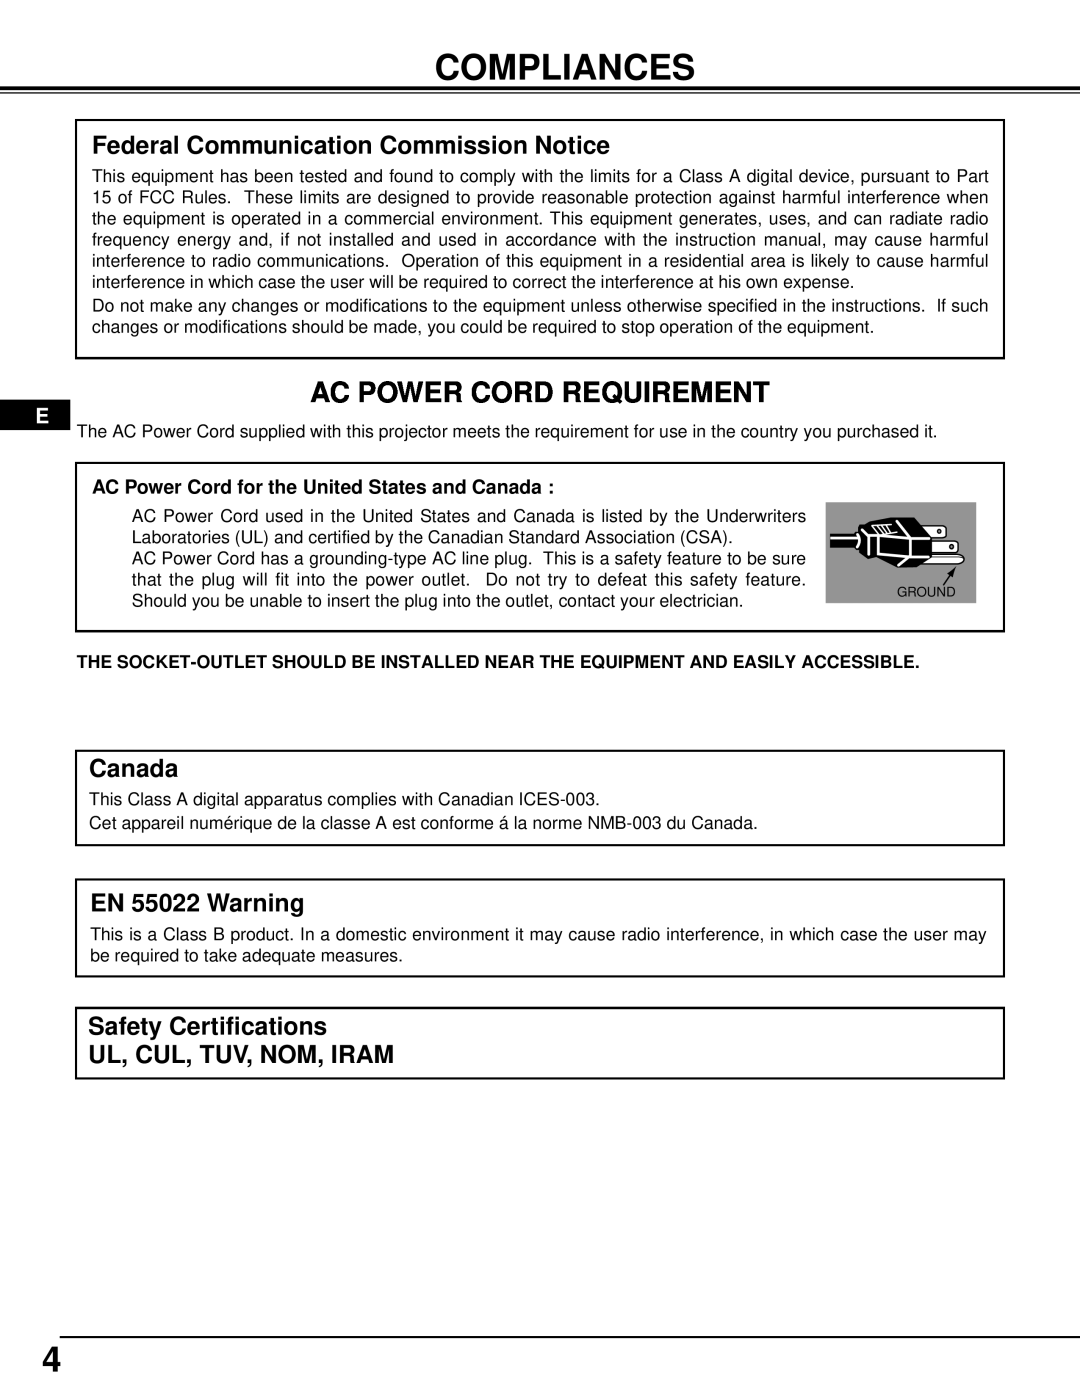 Dukane 28A9058 Compliances, Ac Power Cord Requirement, Federal Communication Commission Notice, Canada, EN 55022 Warning 